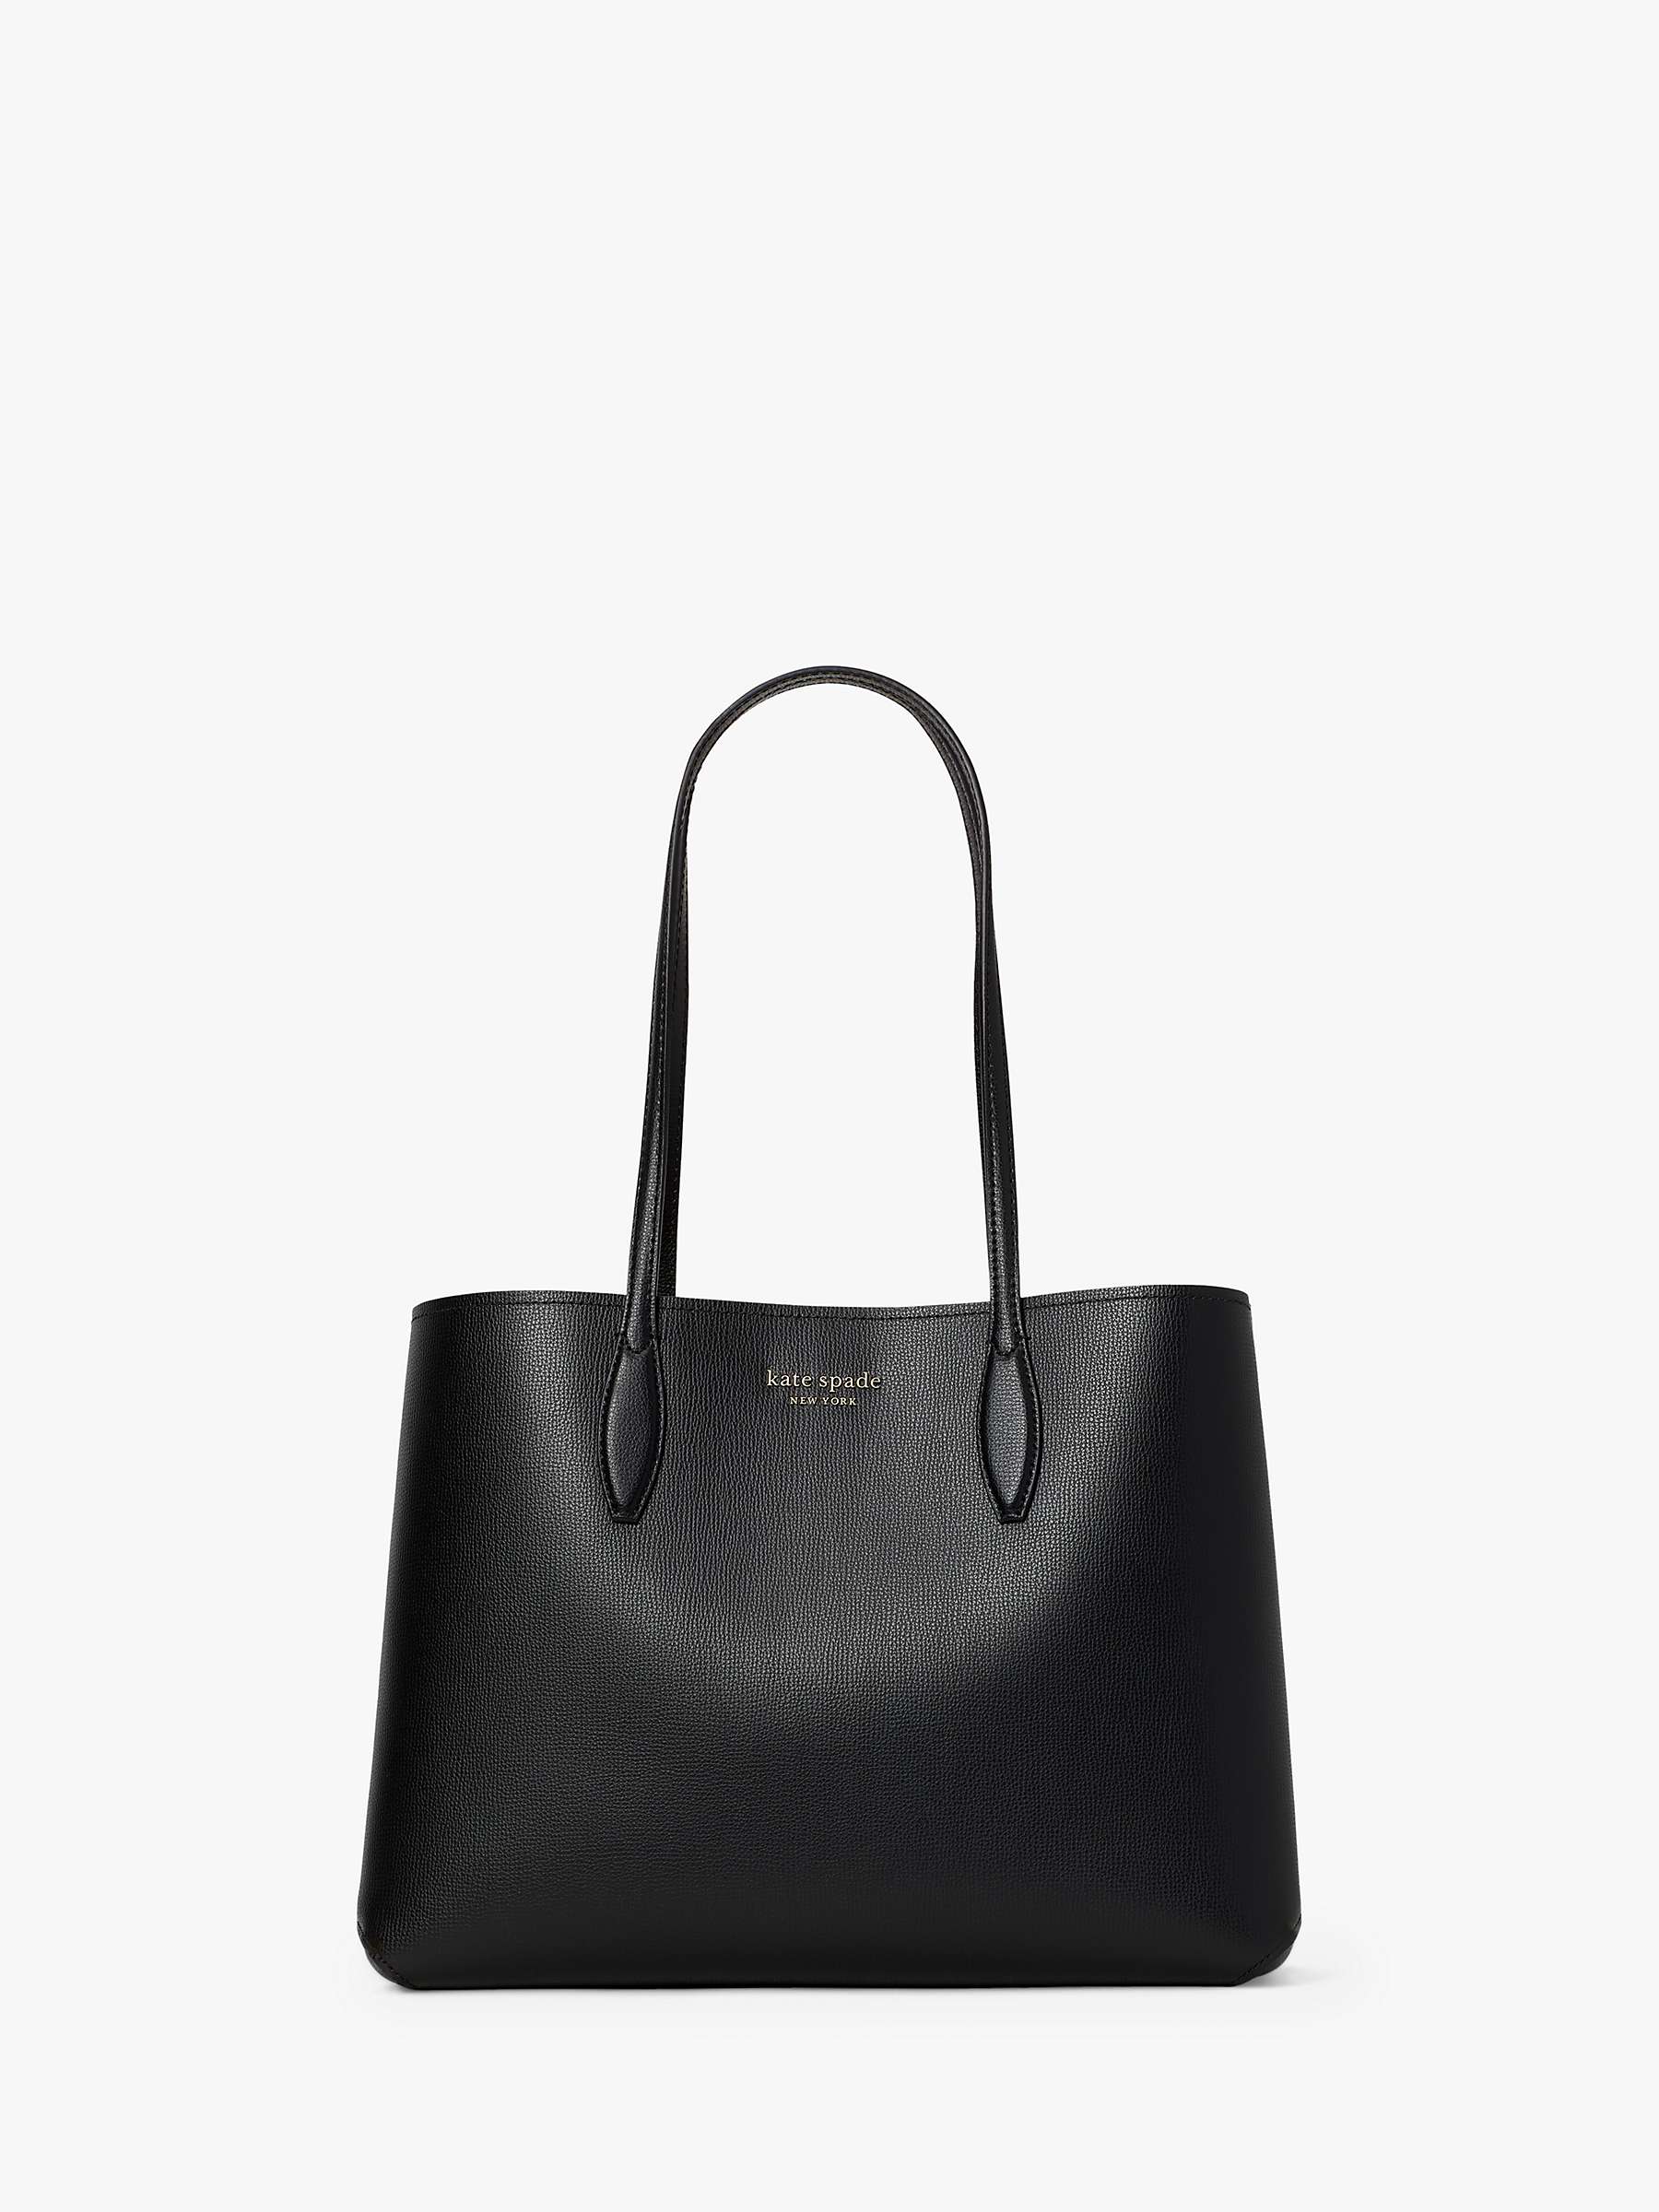 kate spade new york All Day Leather Large Tote Bag, Black at John Lewis &  Partners